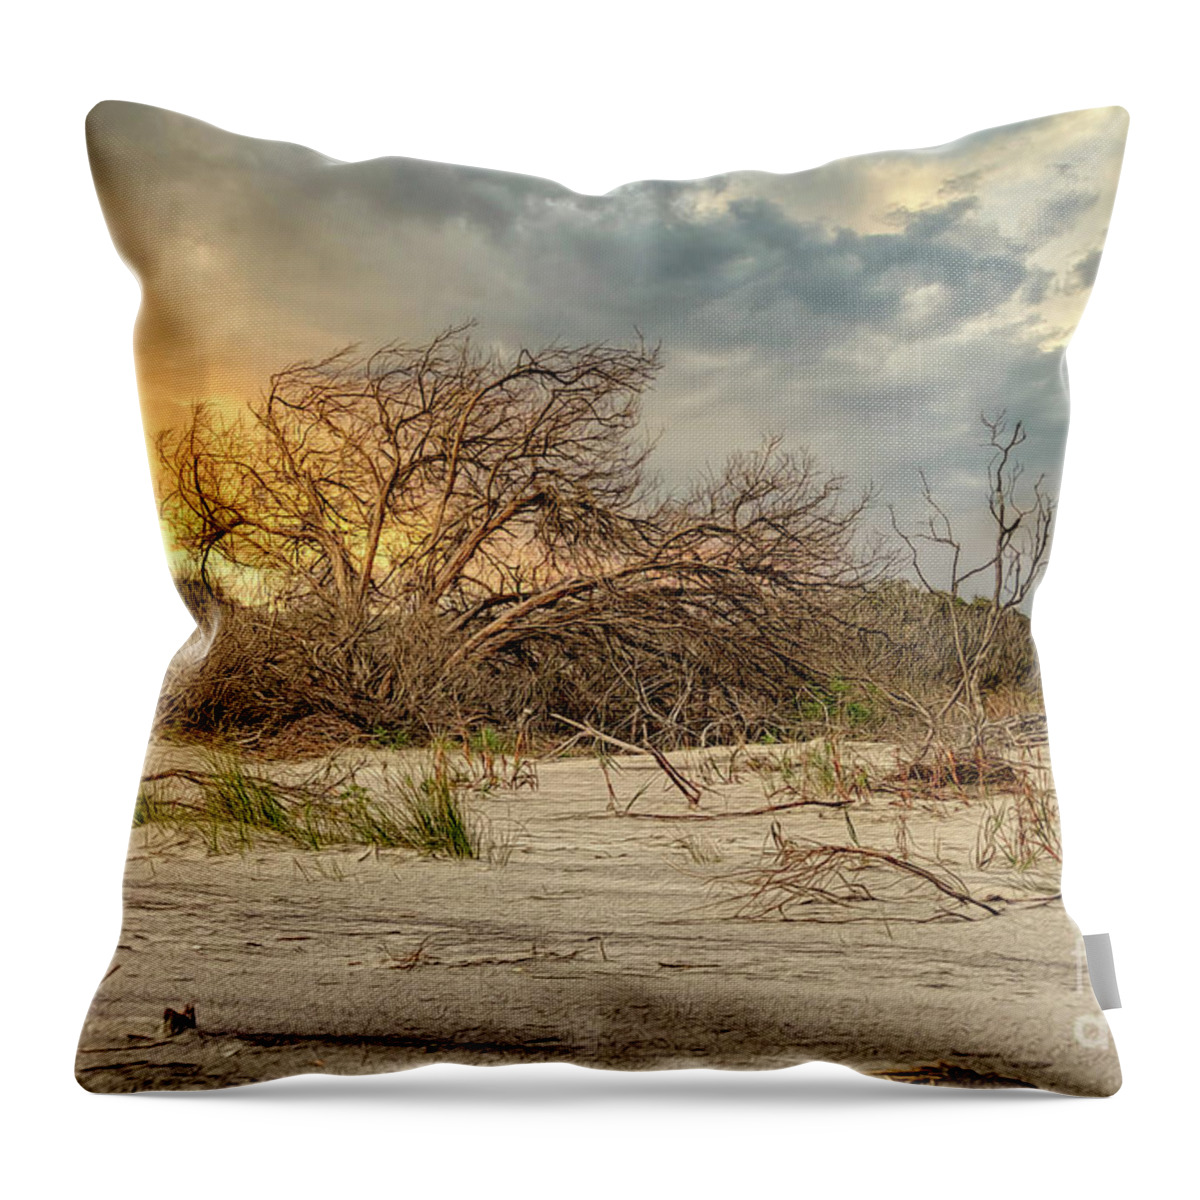 Scenic Throw Pillow featuring the photograph The Burning Bush by Kathy Baccari